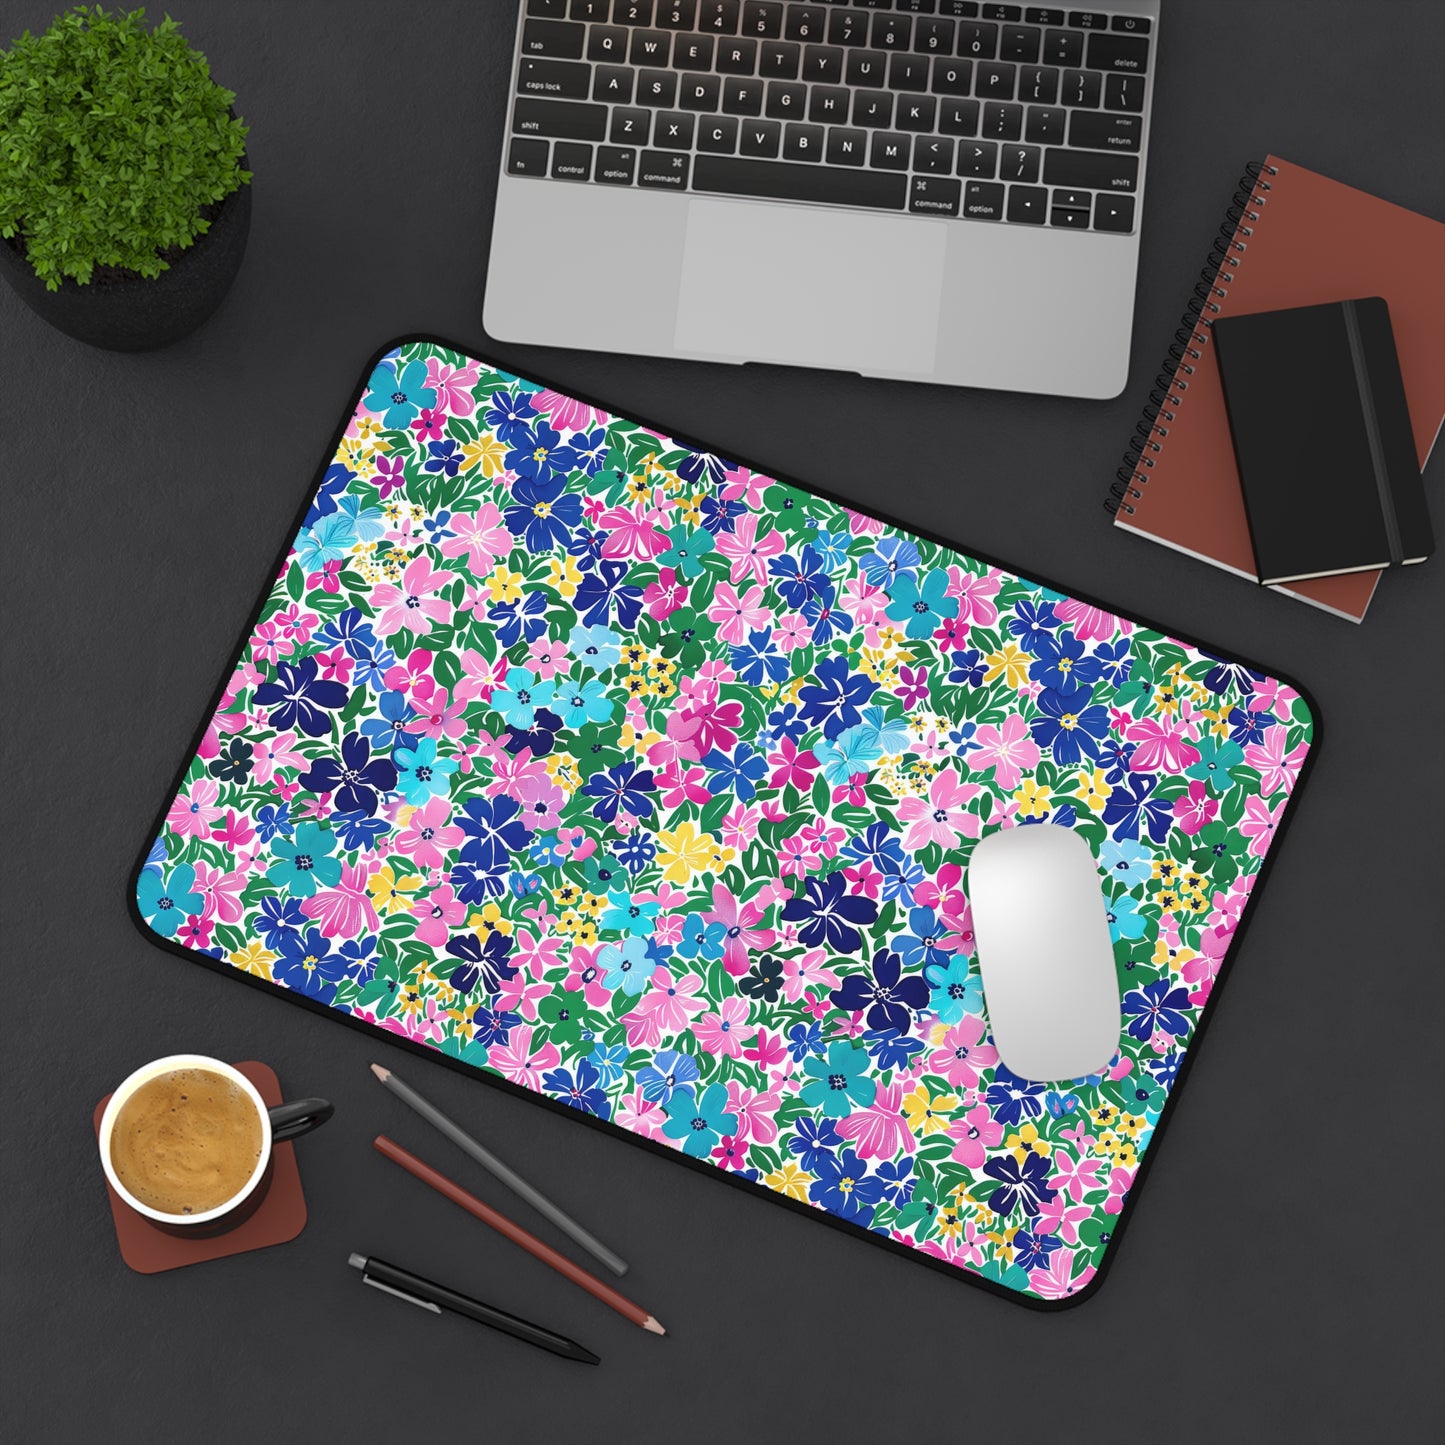 Rainbow Blooms: Vibrant Multi-color Watercolor Flowers in Full Bloom Desk Mat Extended Gaming Mouse Pad - 3 Sizes